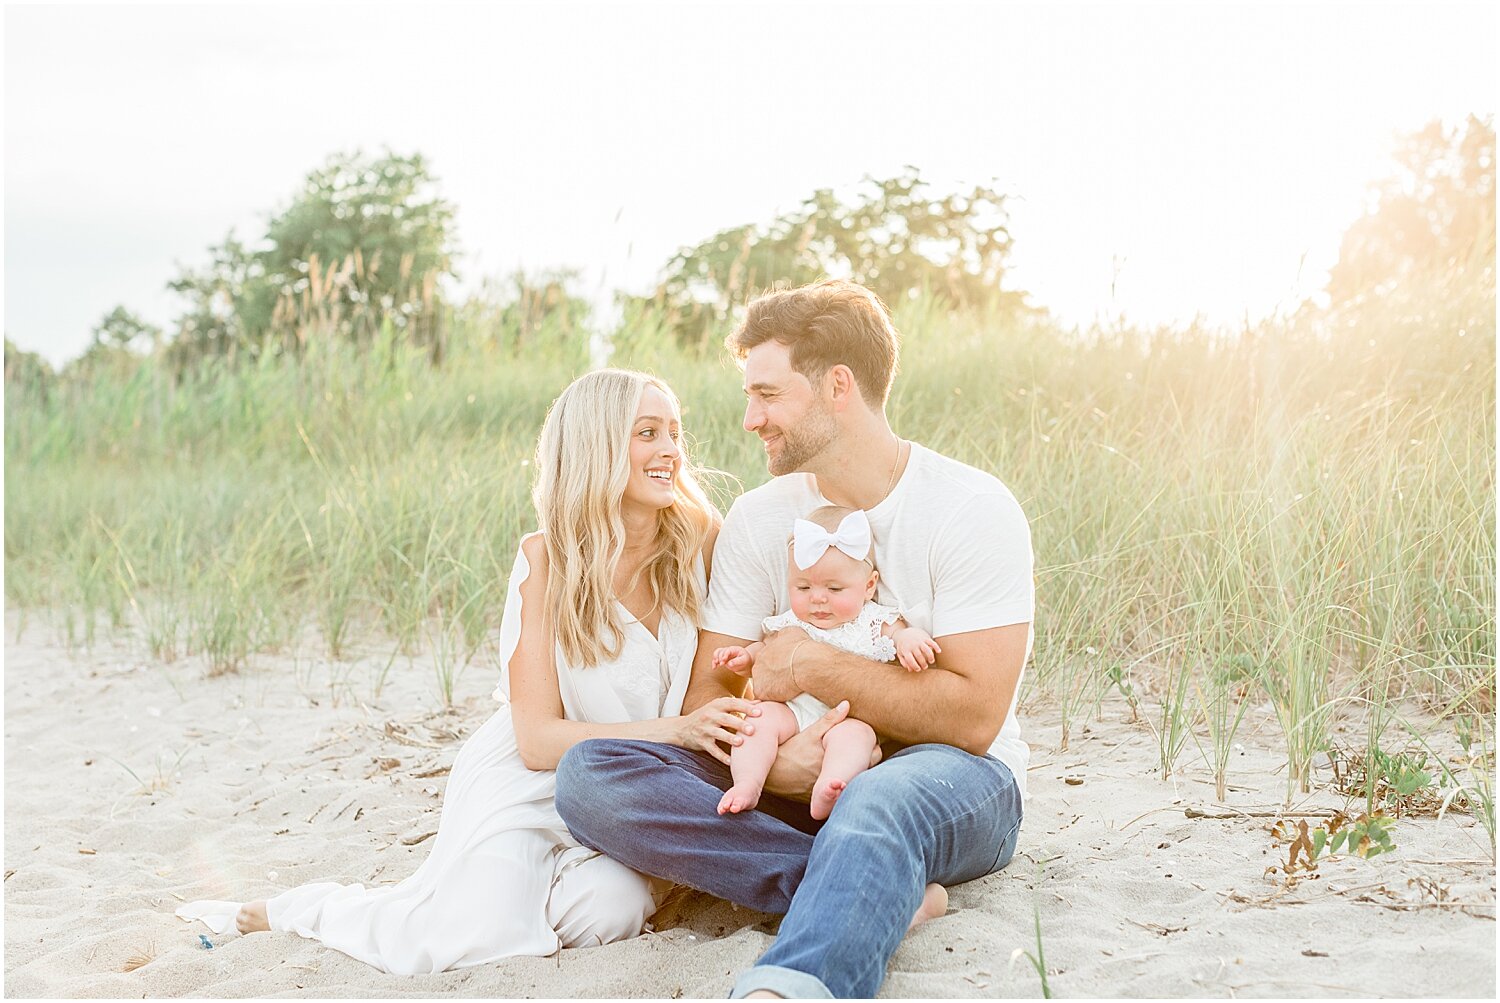 Golden hour sunset family session on the beach in Westport, CT | Kristin Wood Photography